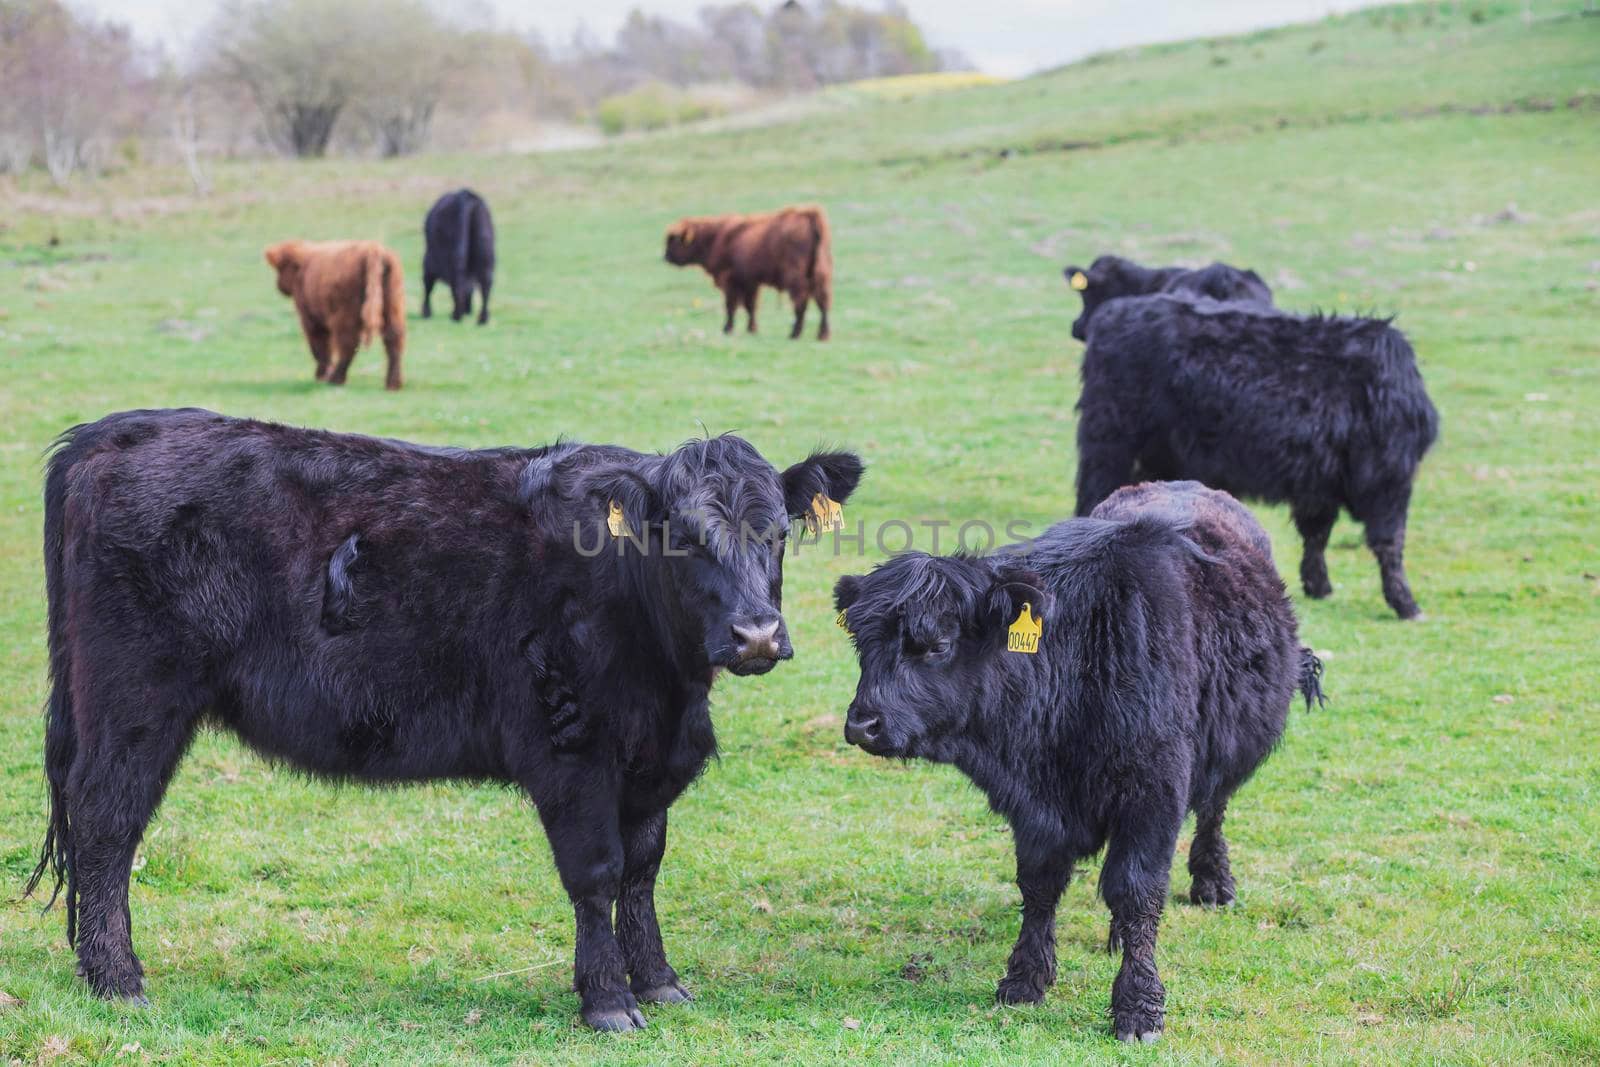 Beautiful long-haired cows graze on a pasture in Denmark.